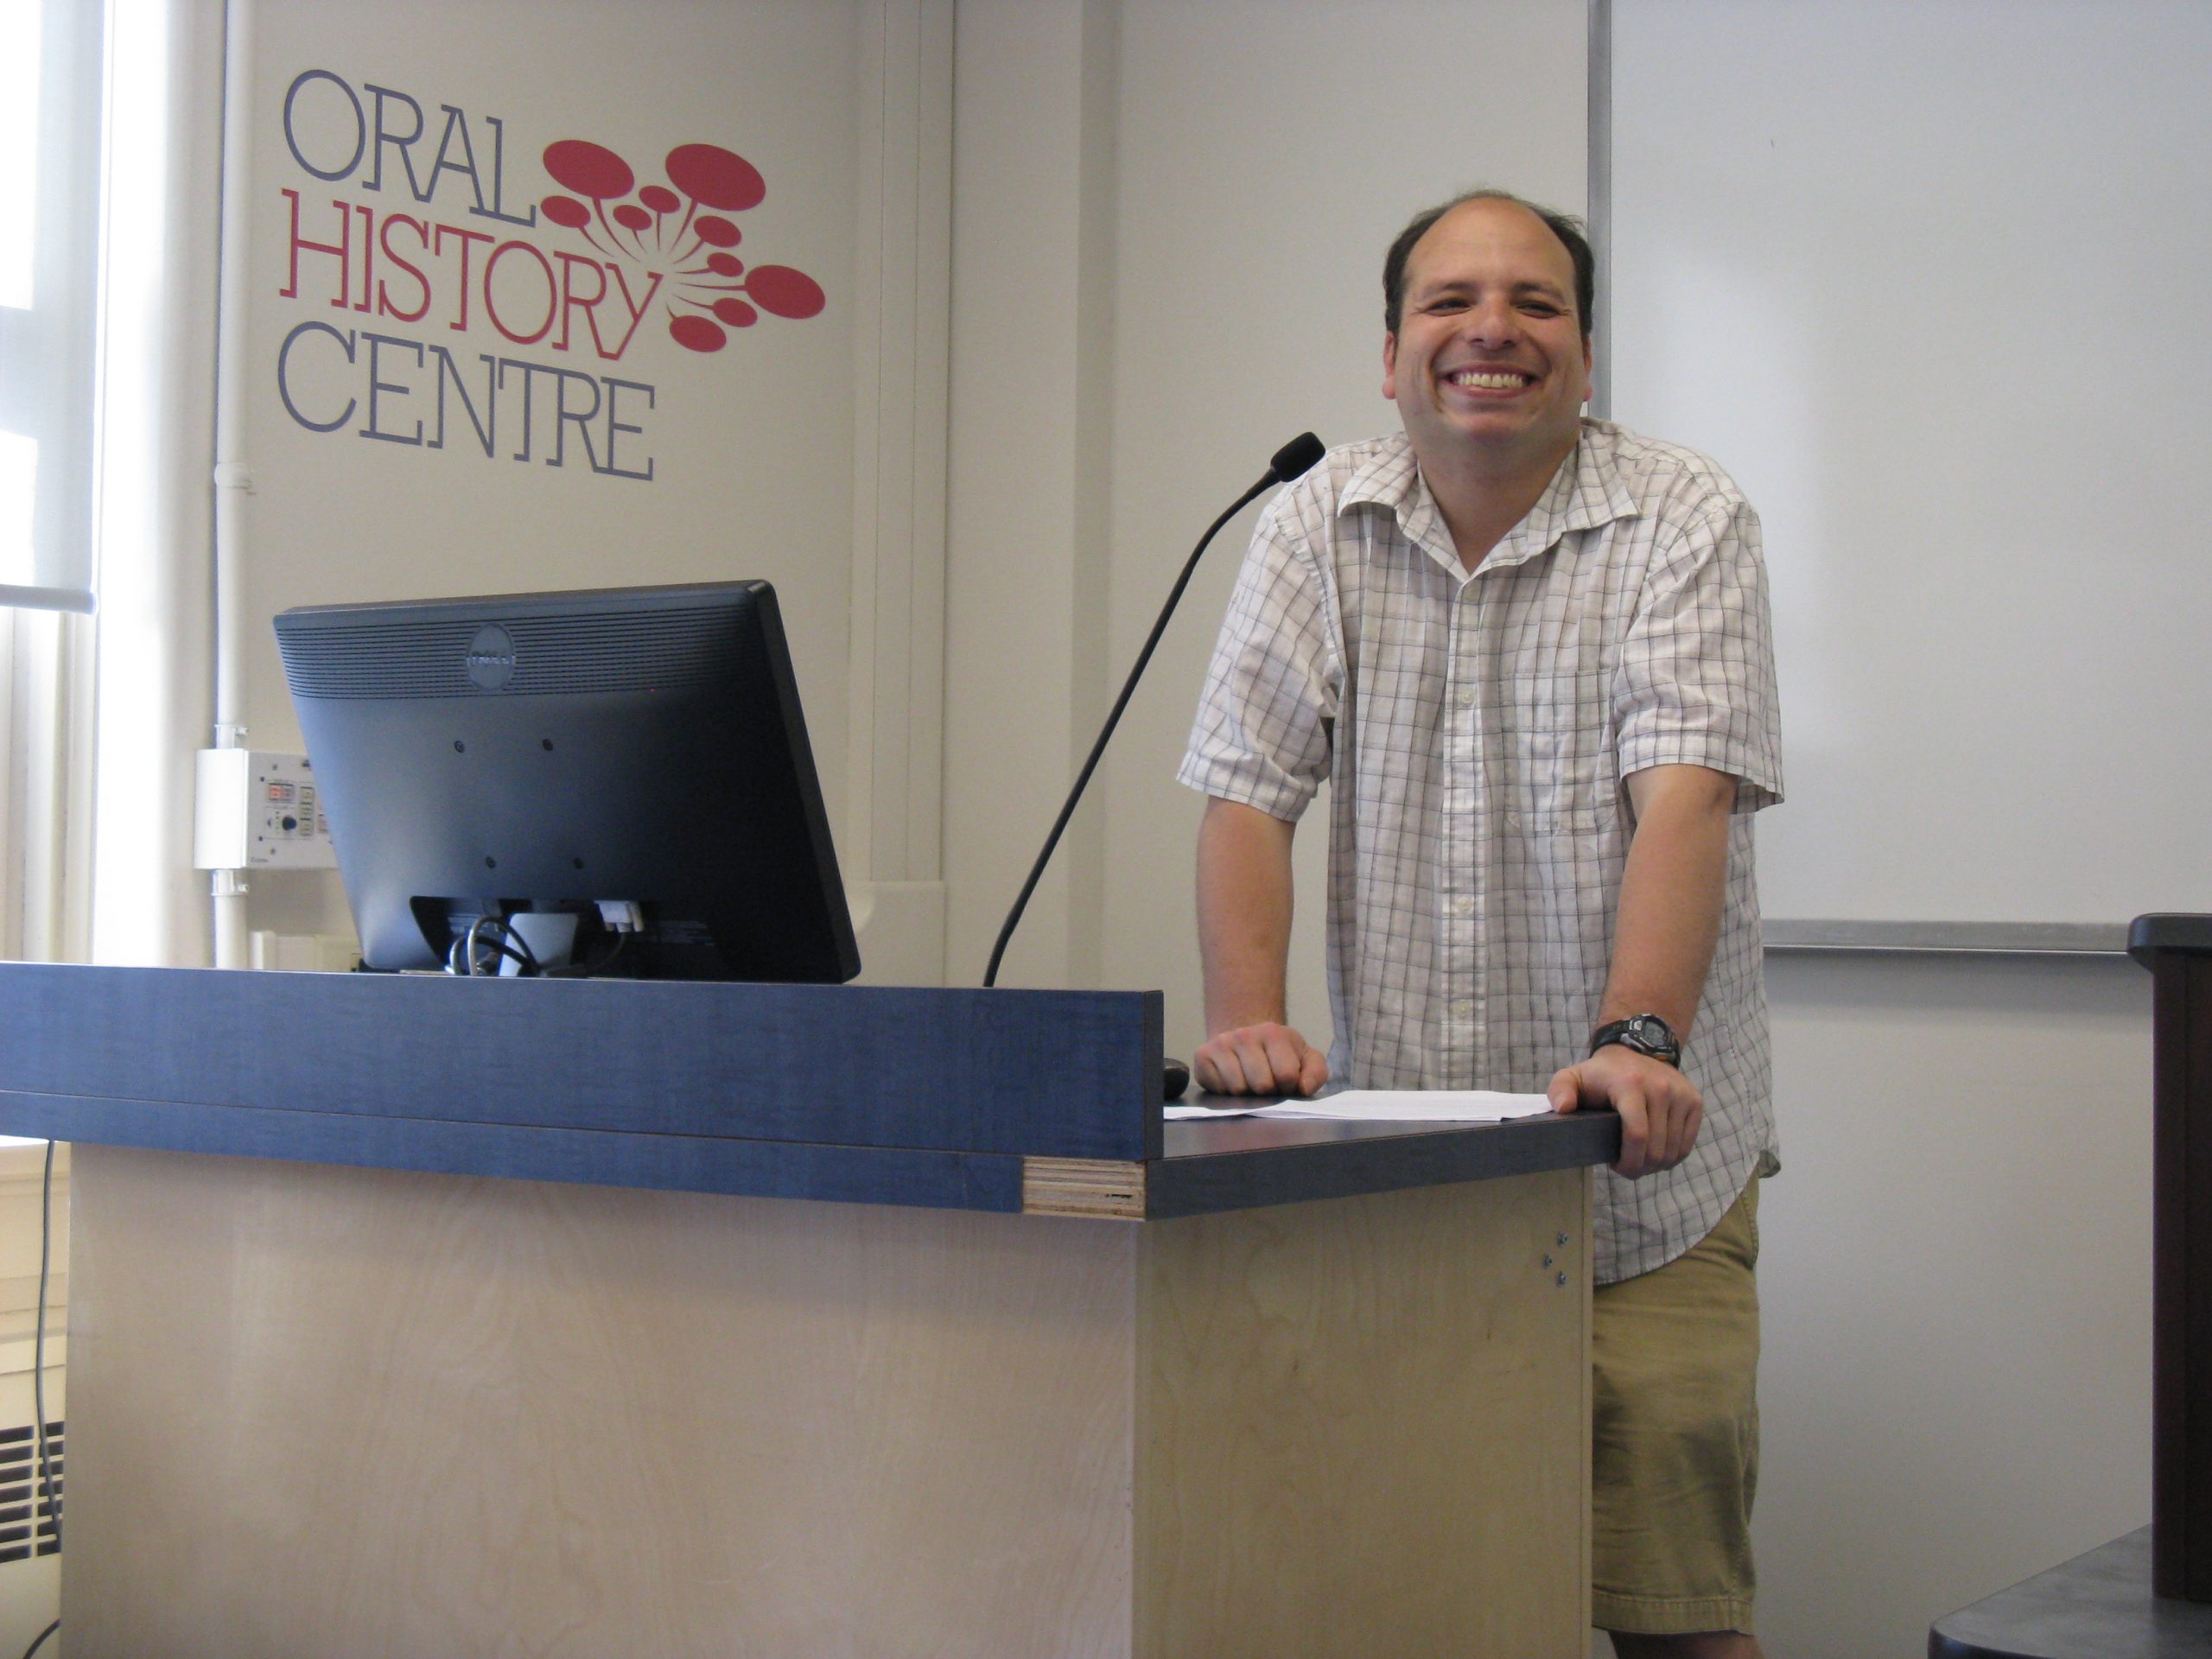 Photograph of Carlos Sosa smiling, standing at podium. In background whiteboard and Oral History Centre logo on wall.